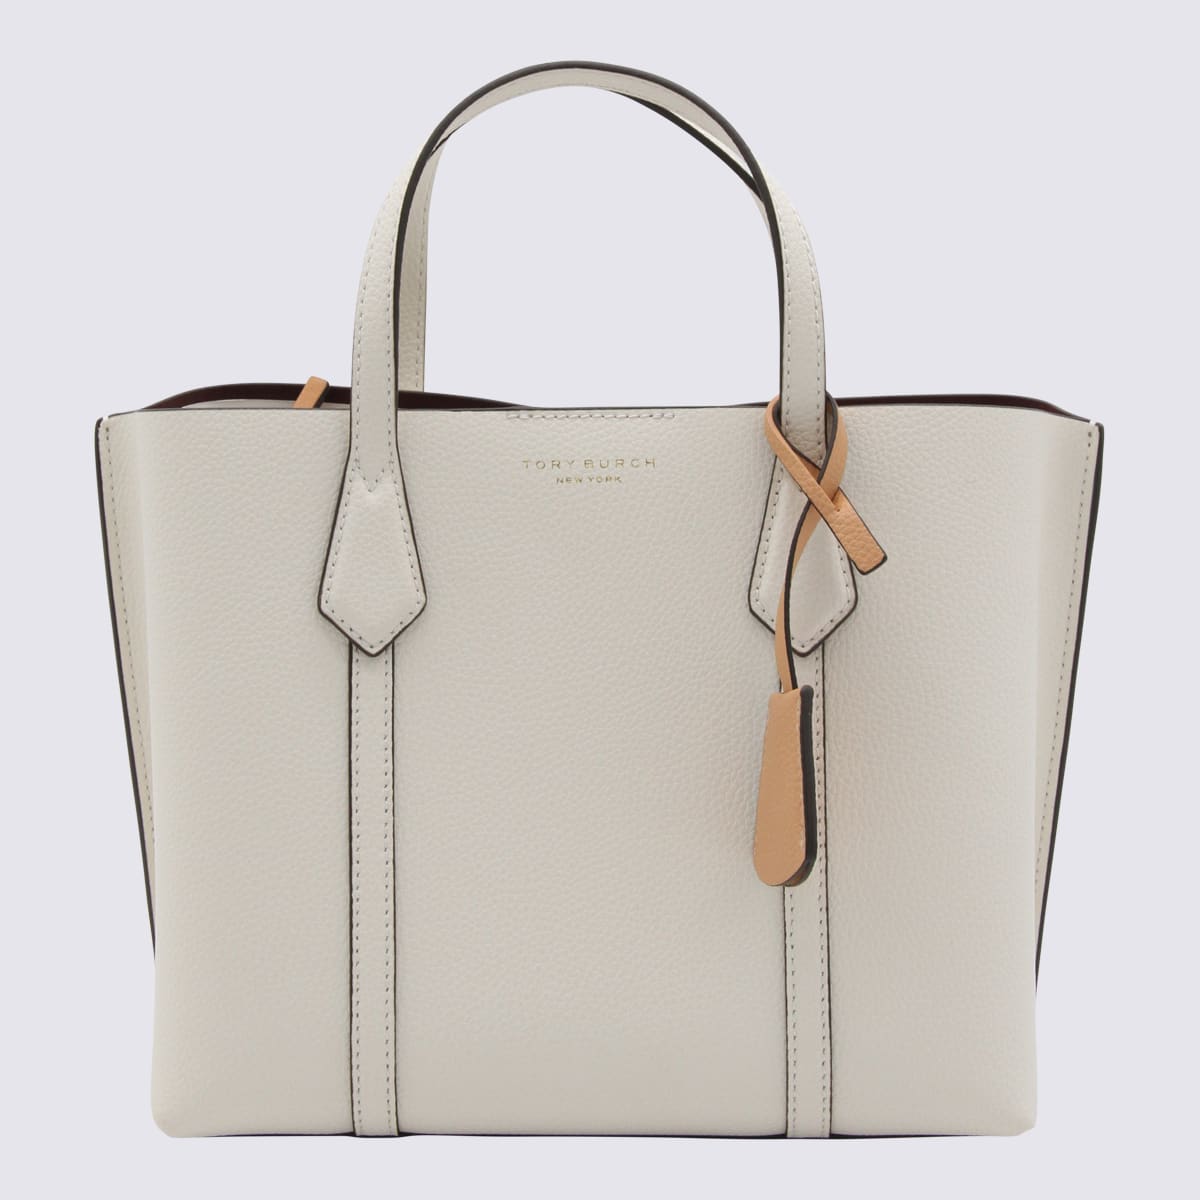 TORY BURCH IVORY AND BEIGE LEATHER PERRY TOTE BAG